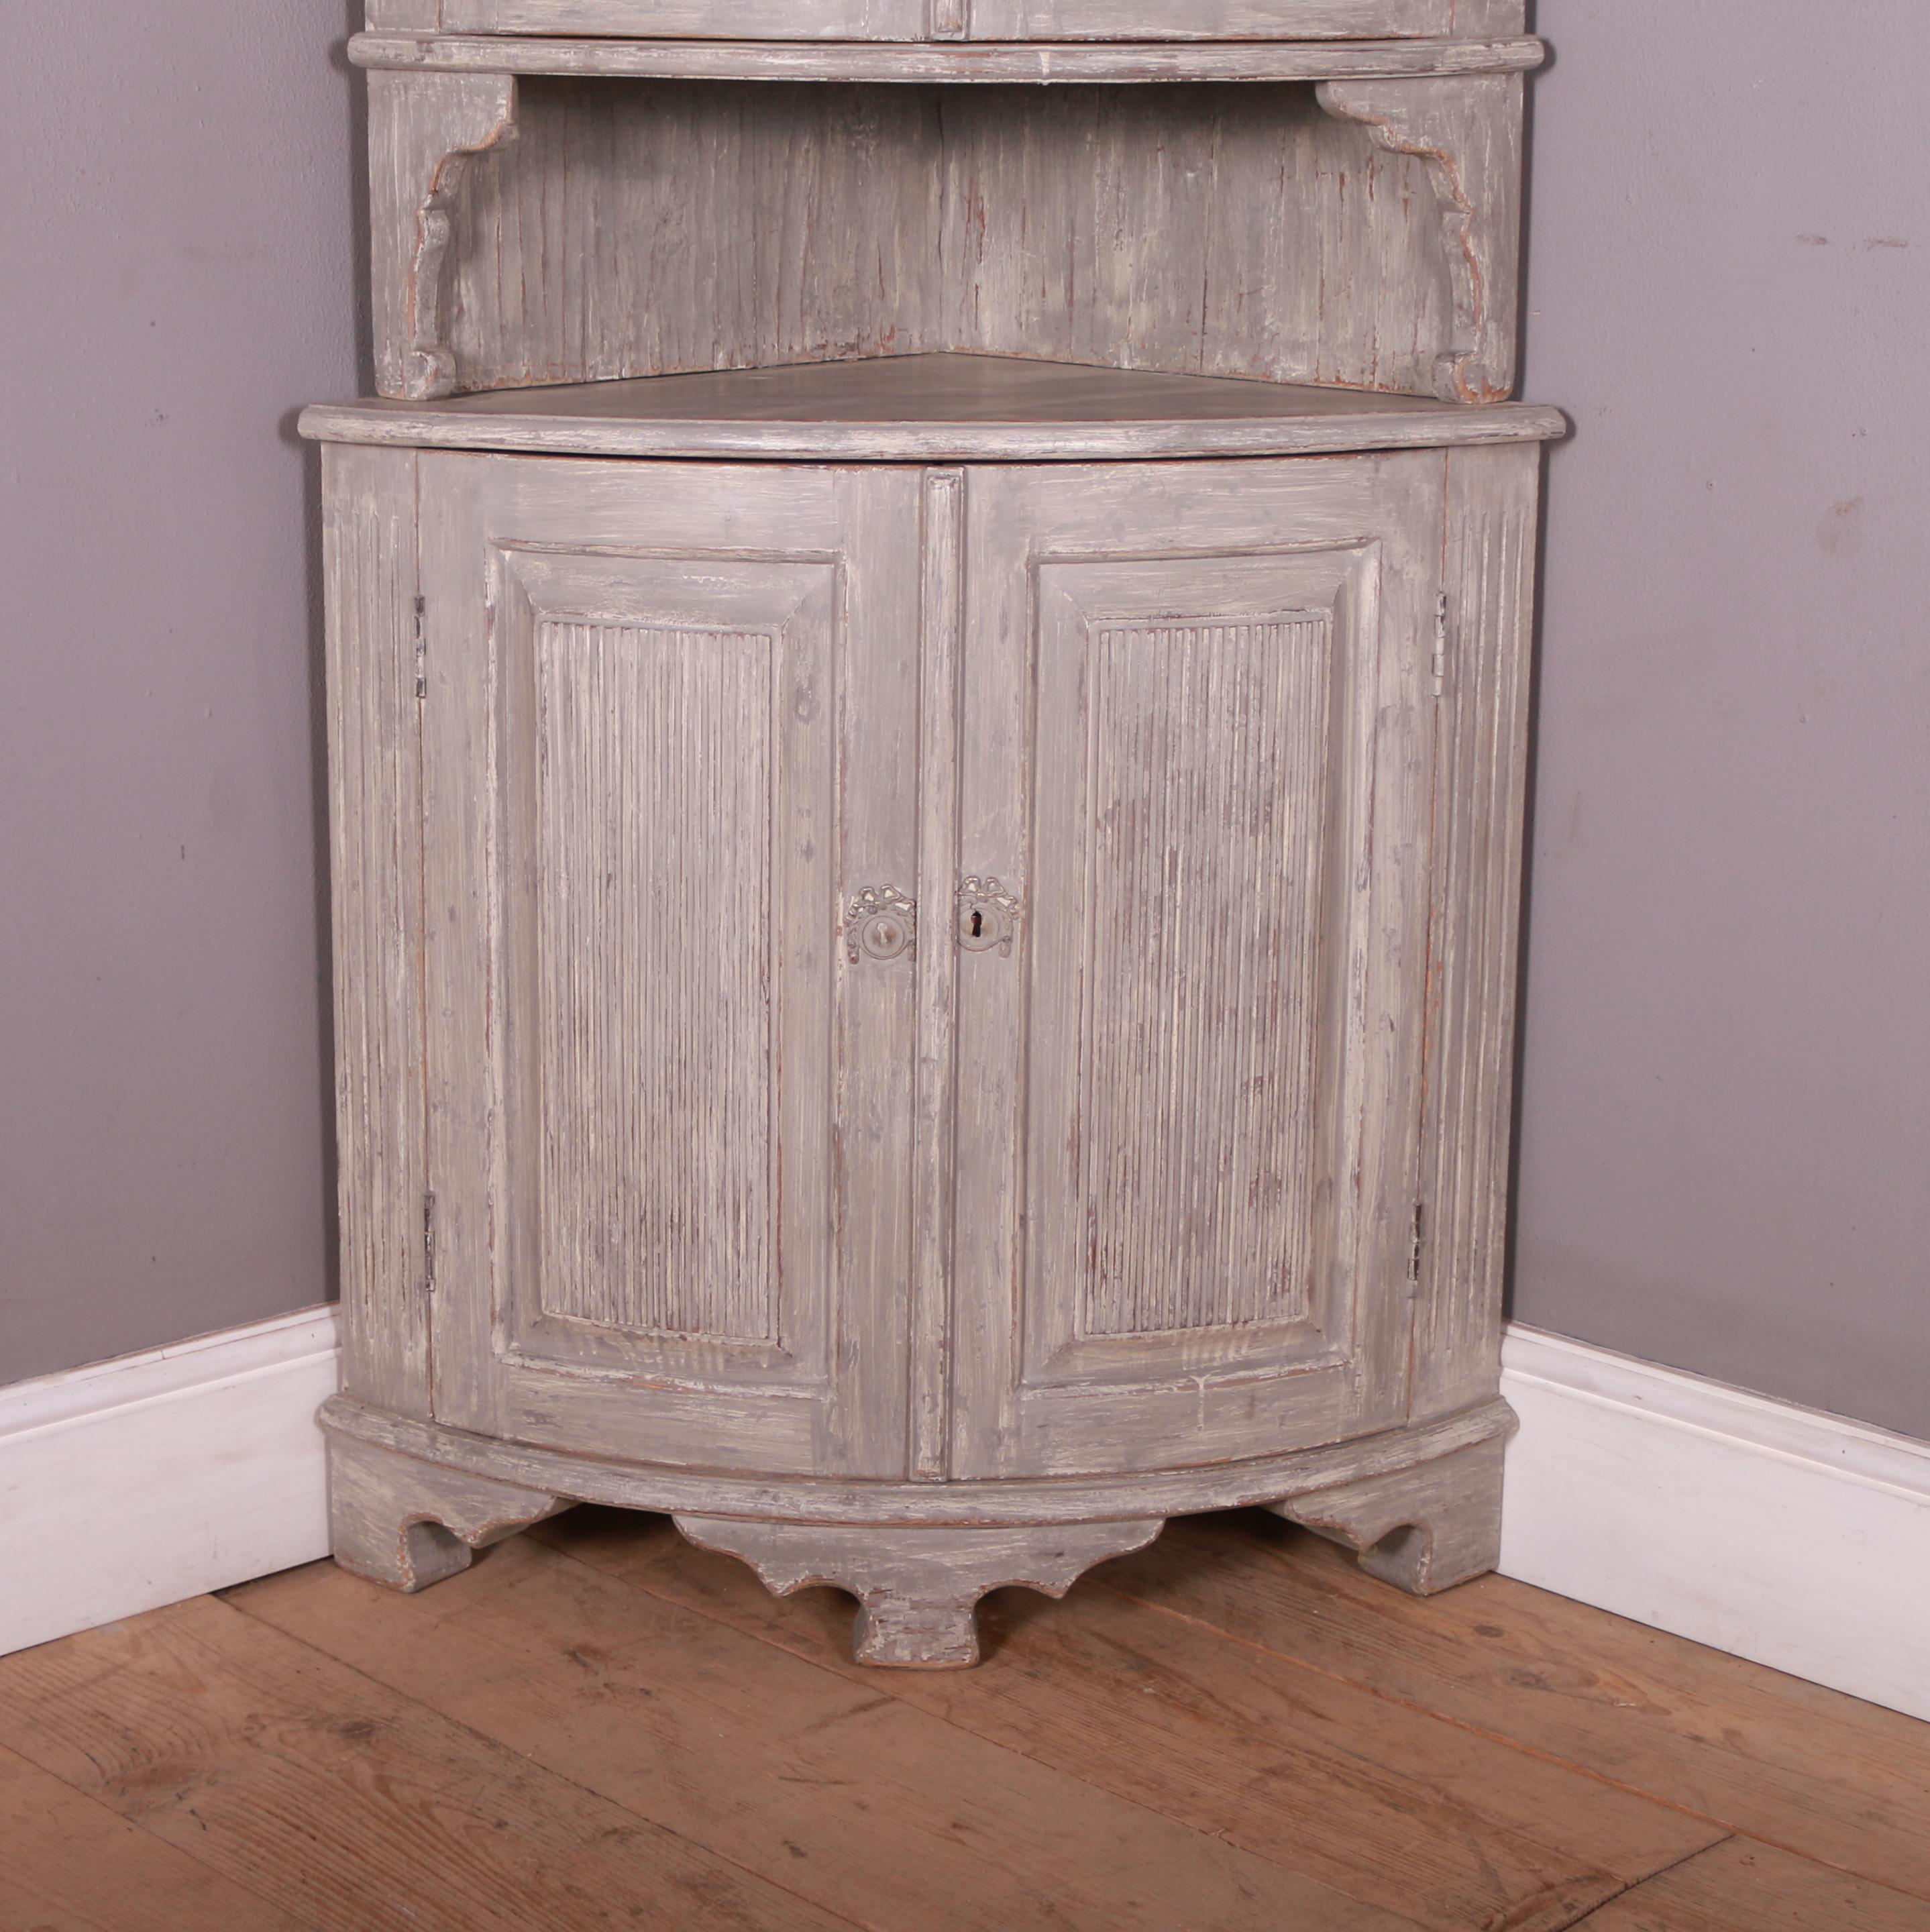 Late 19th C Swedish bowfronted 4 door corner cupboard with reeded panels. 1880.

Will fit into a 22